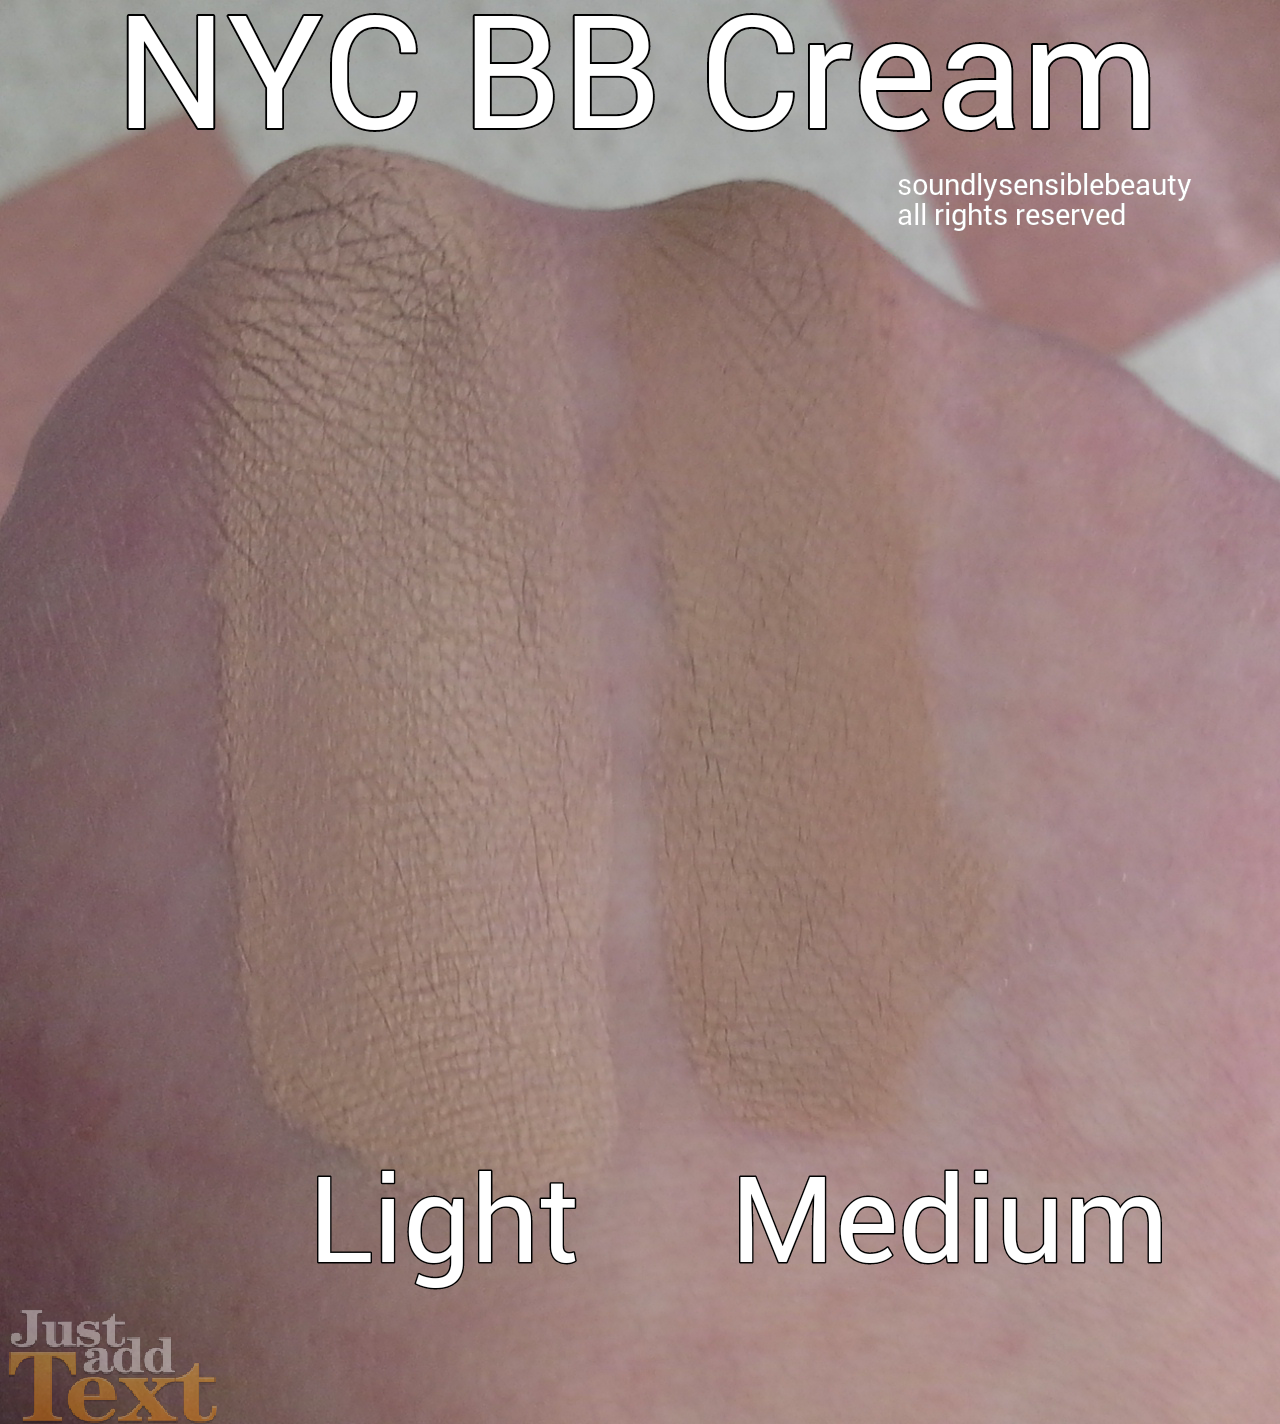 N.Y.C. (New York Color) Smooth Skin 5 in 1 BB Cream Beauty Balm Shade  Swatches. Review Coming Soon!